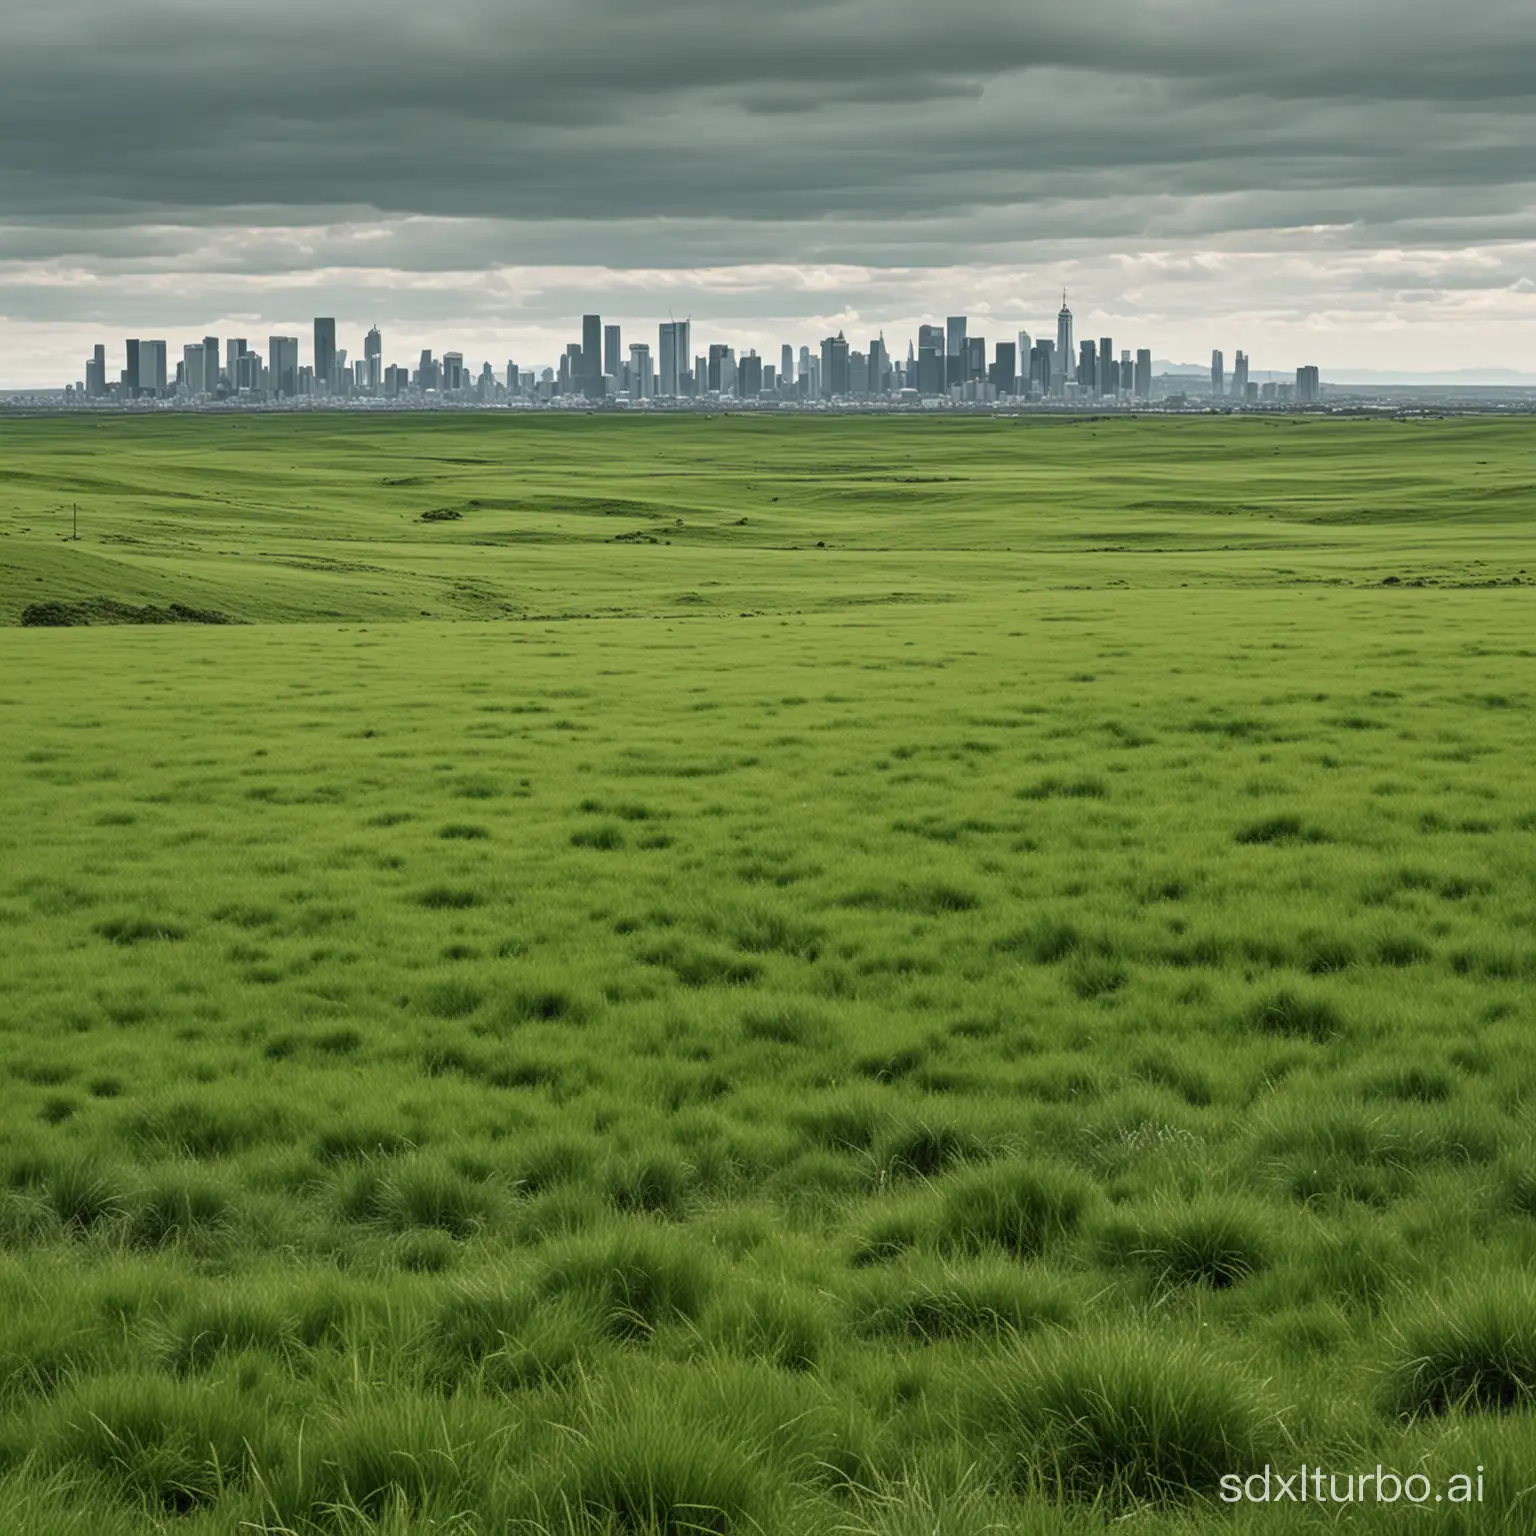 In front of you is a green, vibrant grassland, with the distant outline of a bustling city. The picture shows objects closer appearing larger and those farther away appearing smaller.